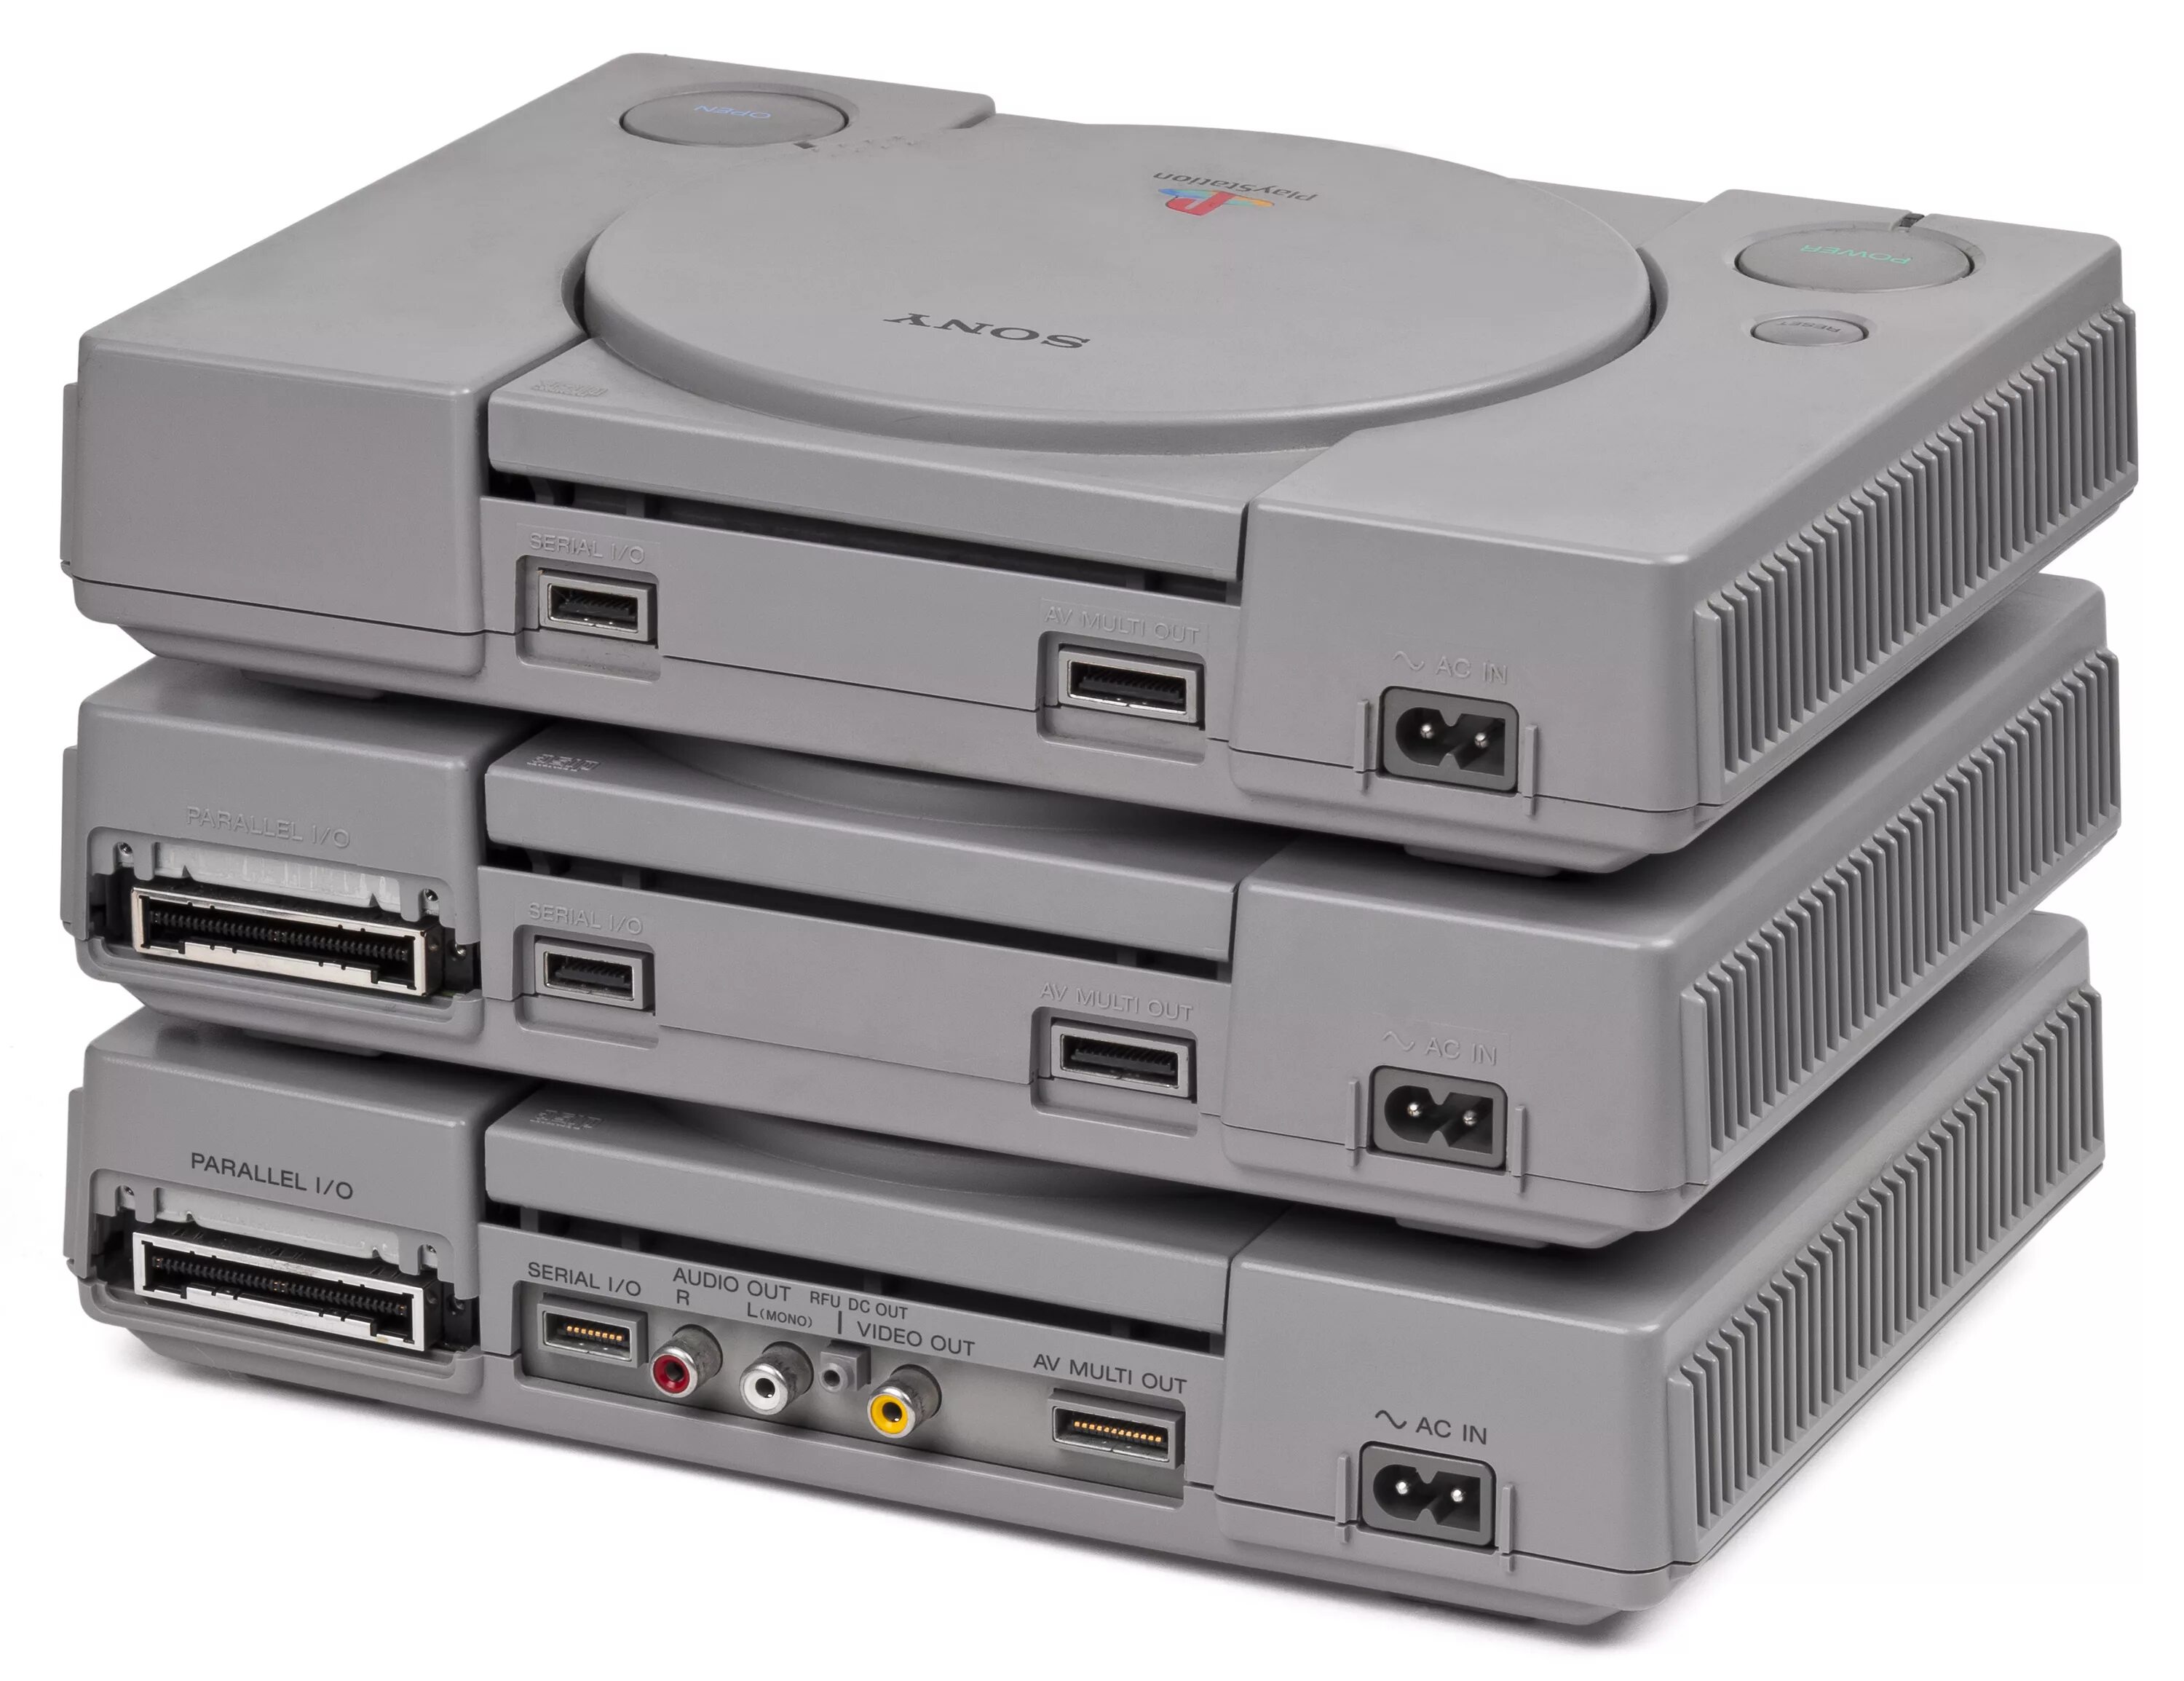 Sony PLAYSTATION 1. Sony PLAYSTATION ps1. Ps1 SCPH 5903. Sony PSX PLAYSTATION 1. Мк1 пс5